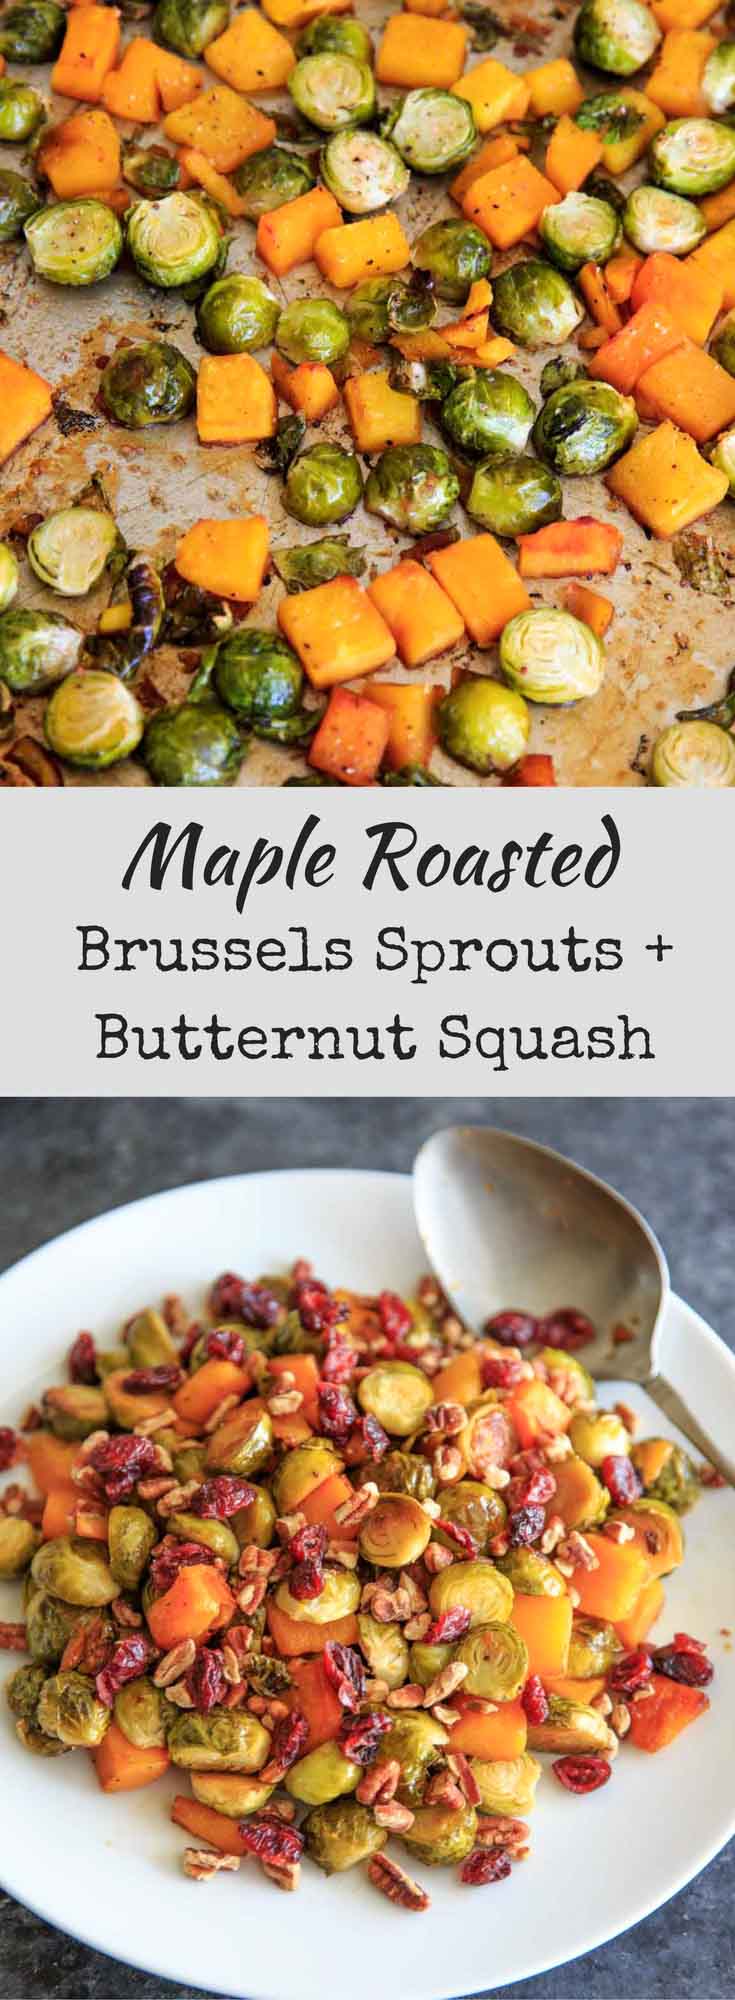 Maple Roasted Brussels Sprouts and Butternut Squash - Trial and Eater